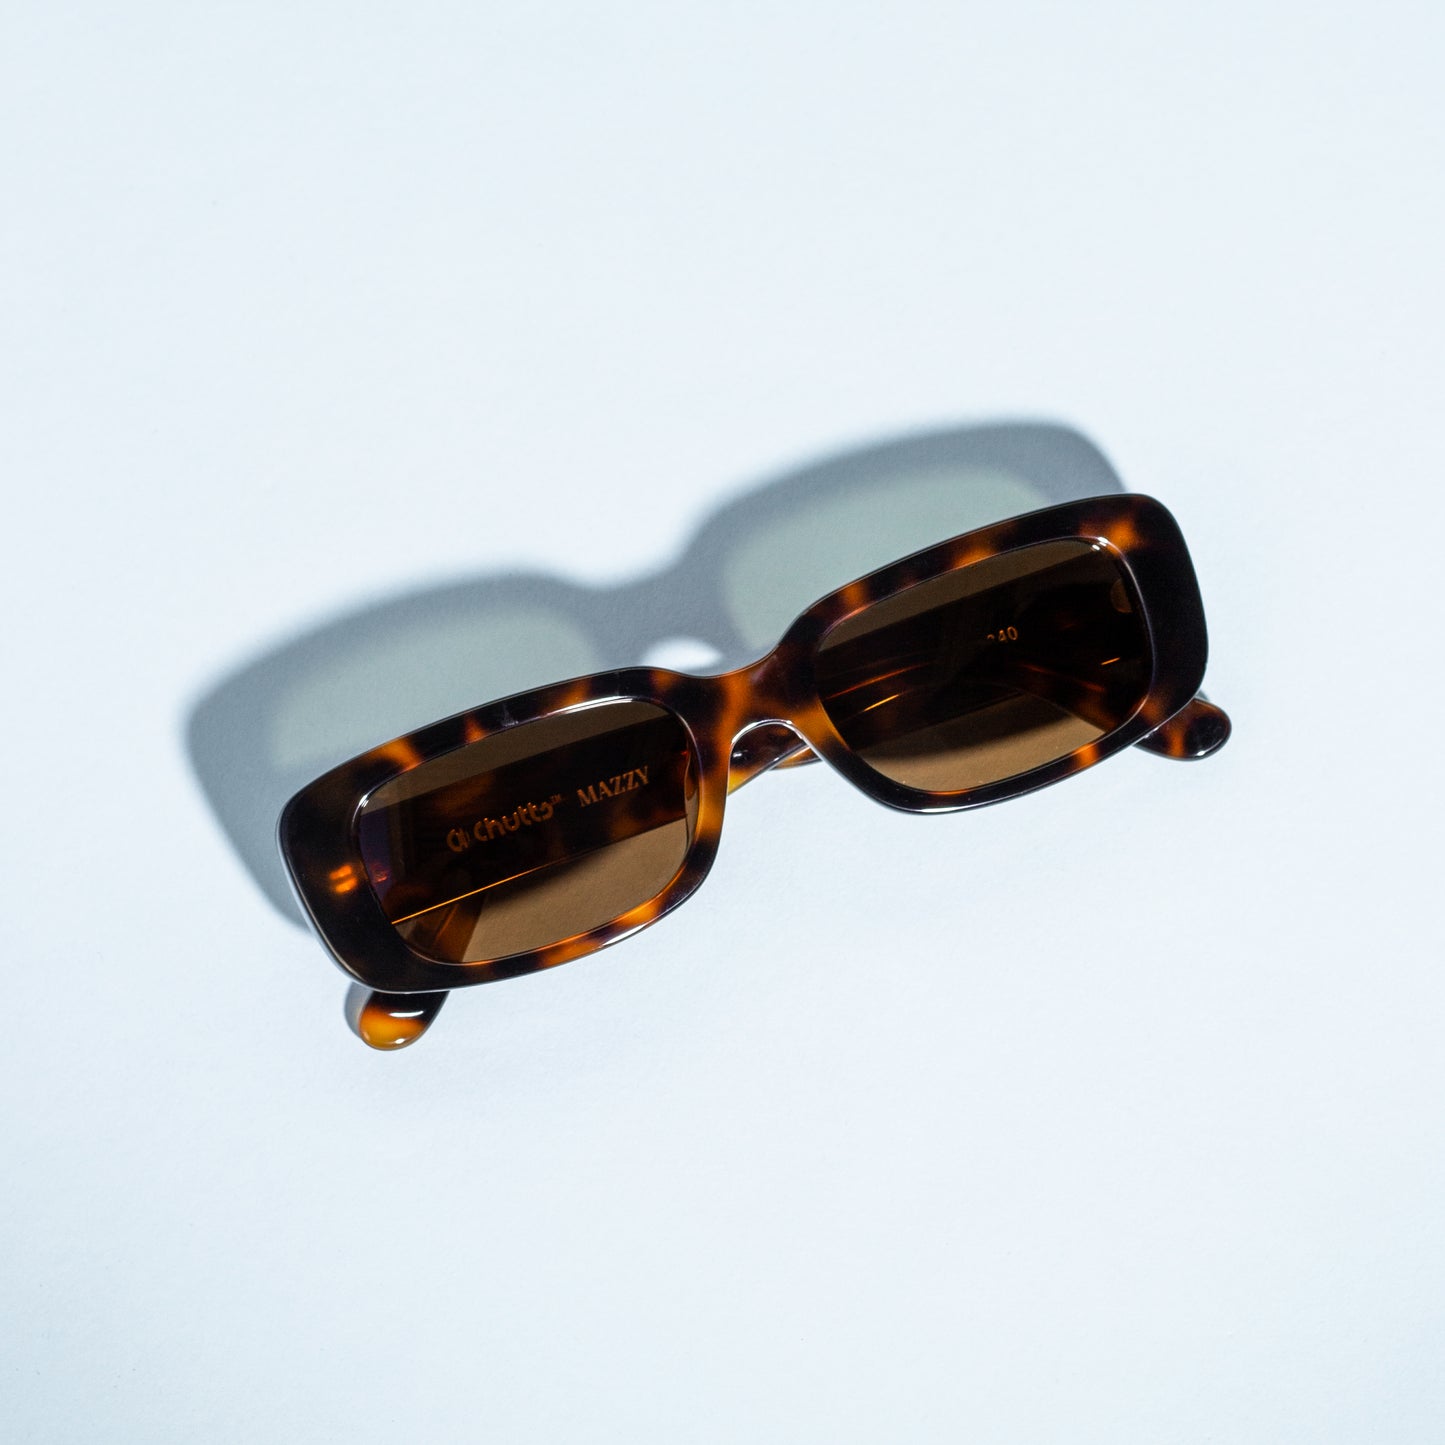 MAZZY - BROWN TORT / Toffee Polarised Lens